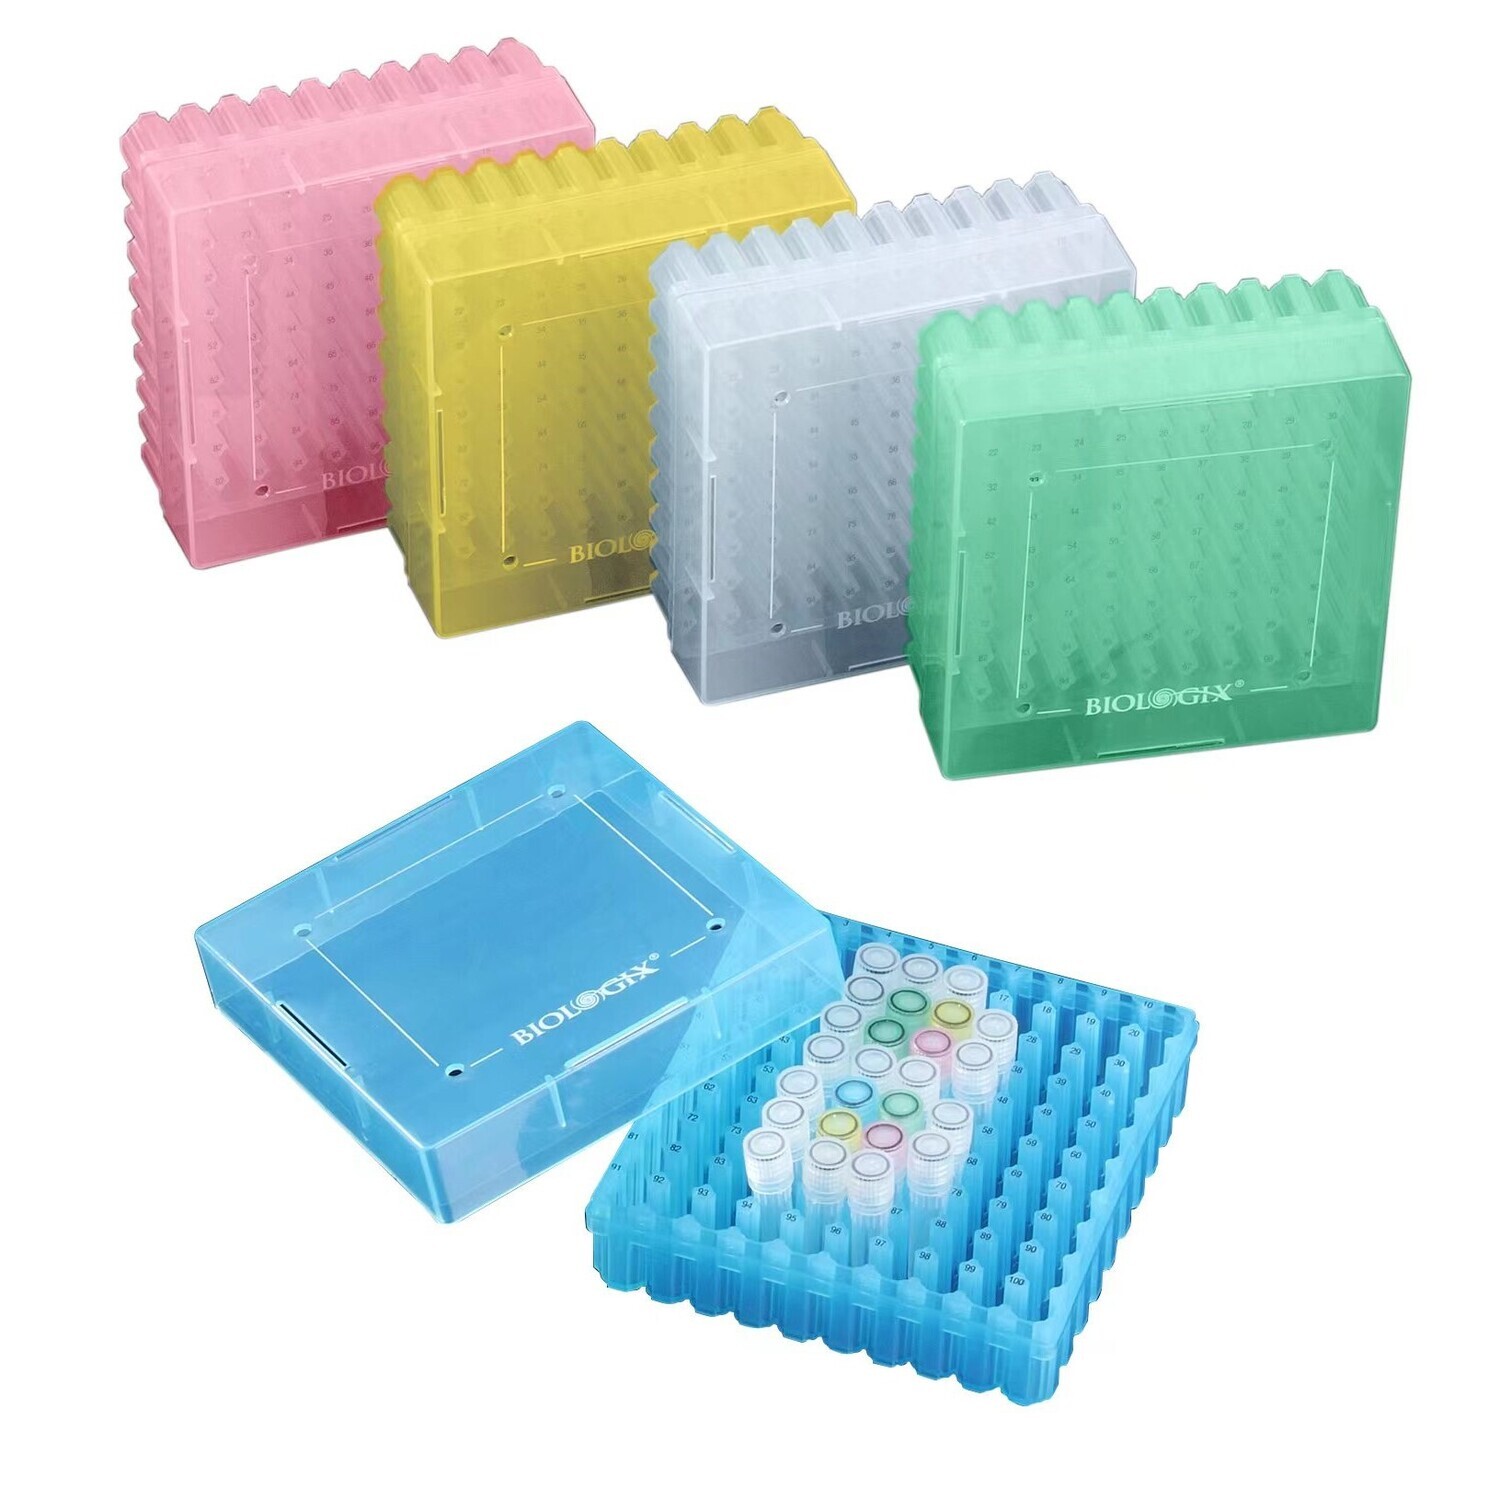 CryoKING PP Cryogenic Boxes (2in. 100-Well, Assorted Colors), 5 Pieces/Pack, 4 Packs/Case